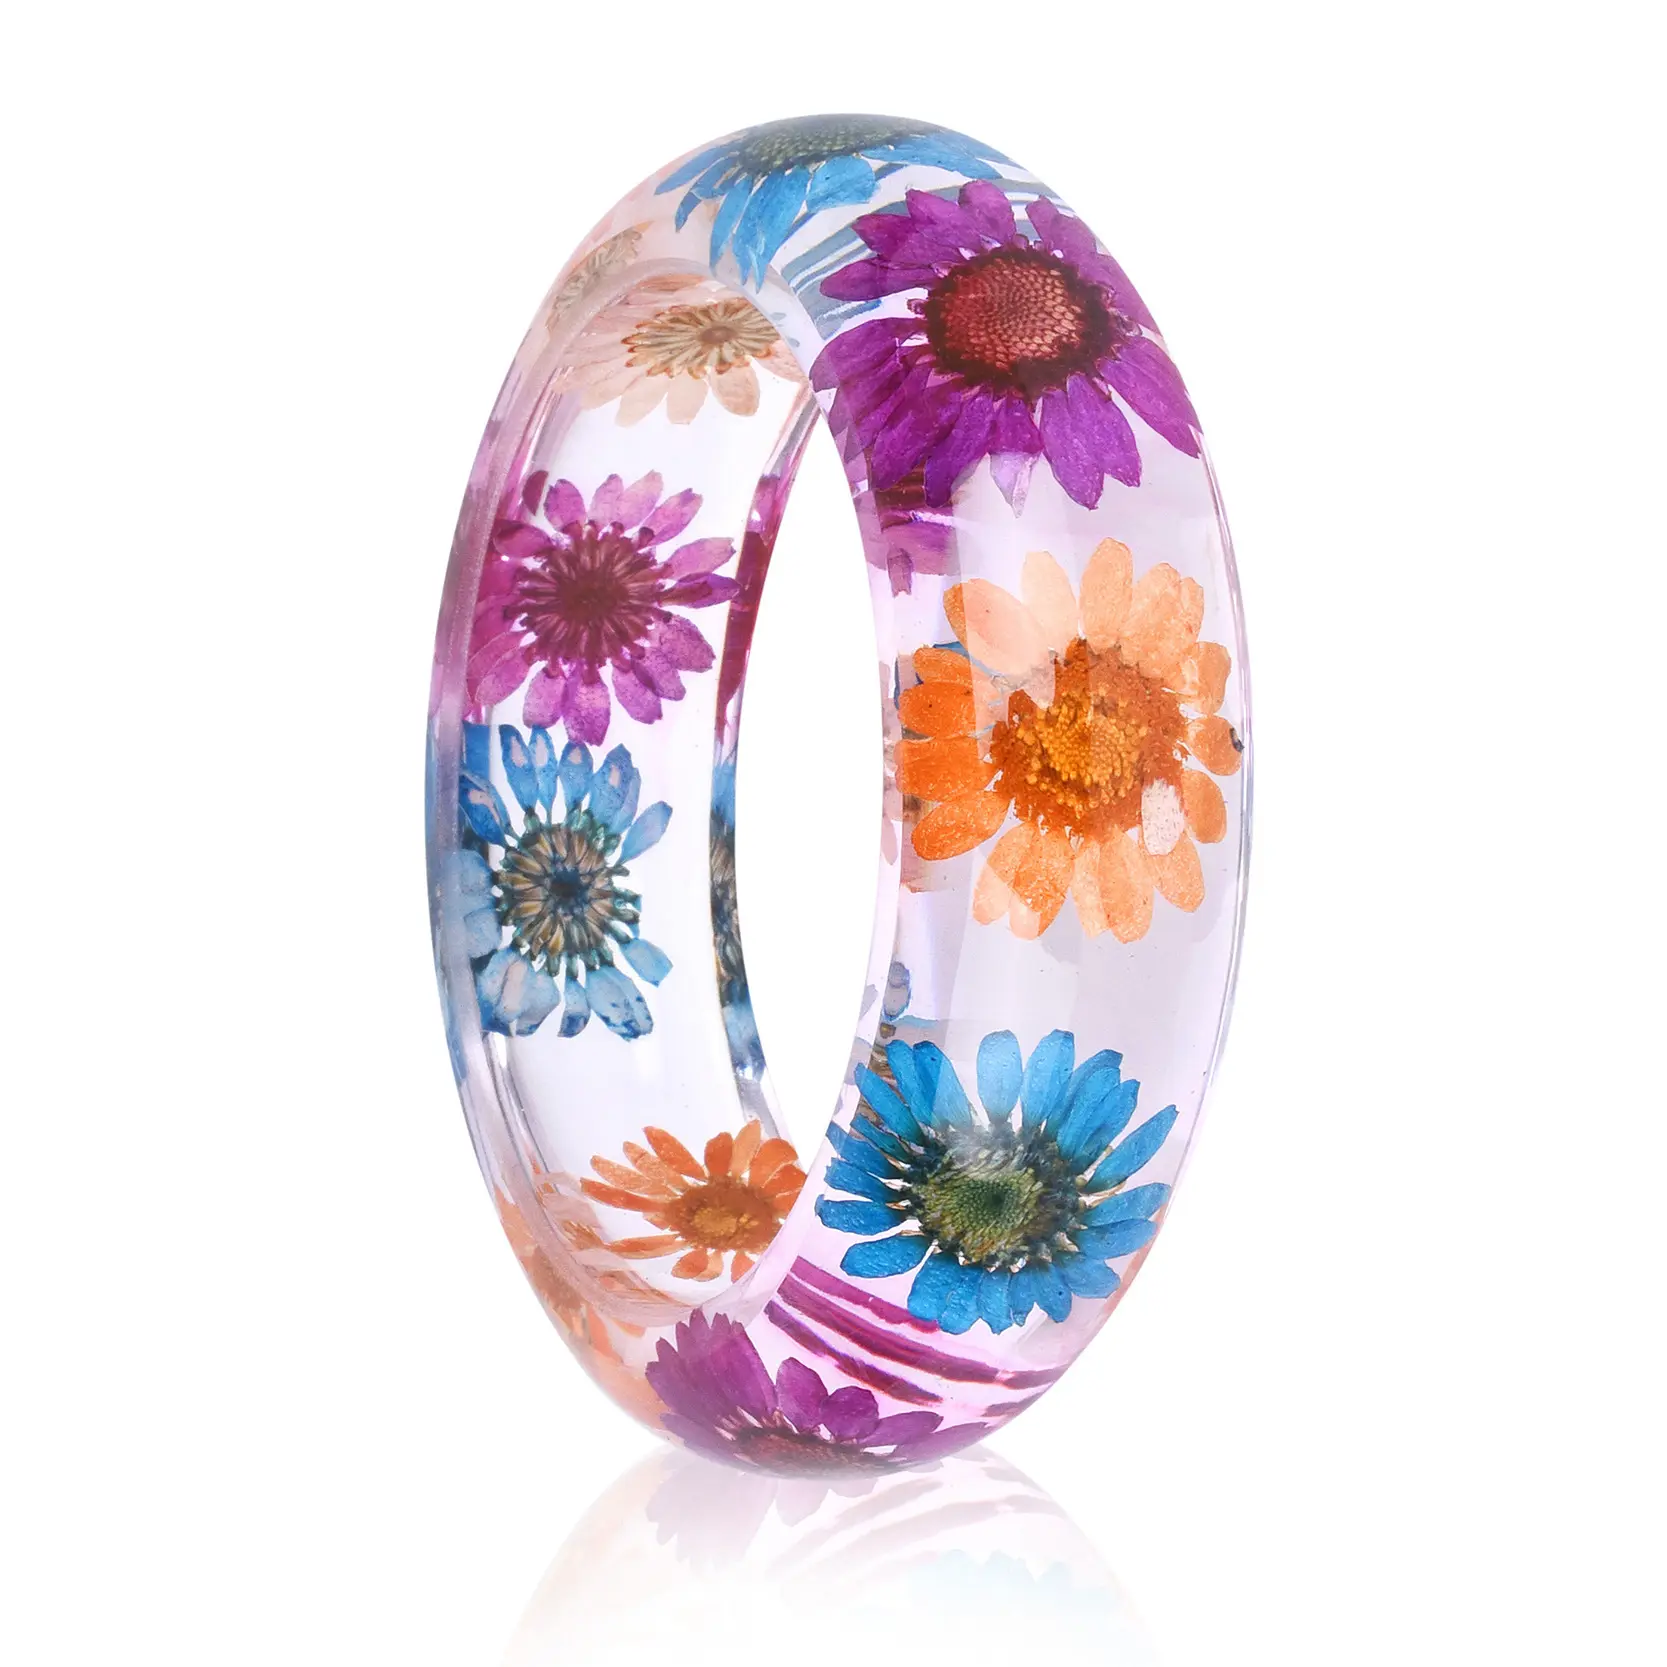 Unique Female Handmade Plant Jewelry Crystal Resin Jewelry Natural Flower Real Pressed Dried Flower Bracelet Bangle